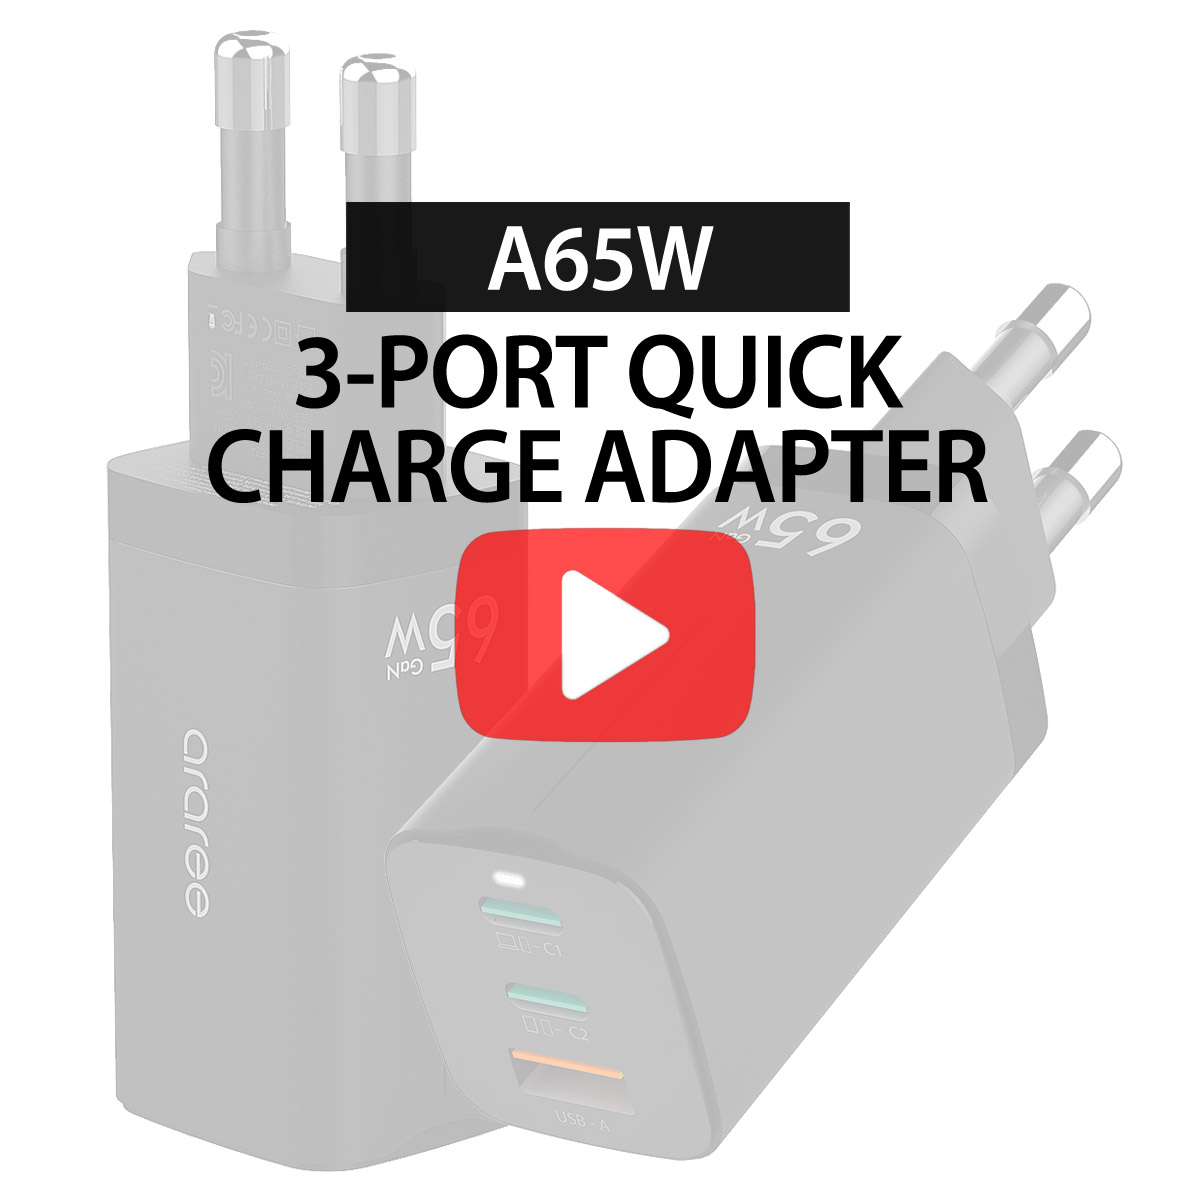 [araree] A65W , 3-PORT QUICK CHARGE ADAPTER